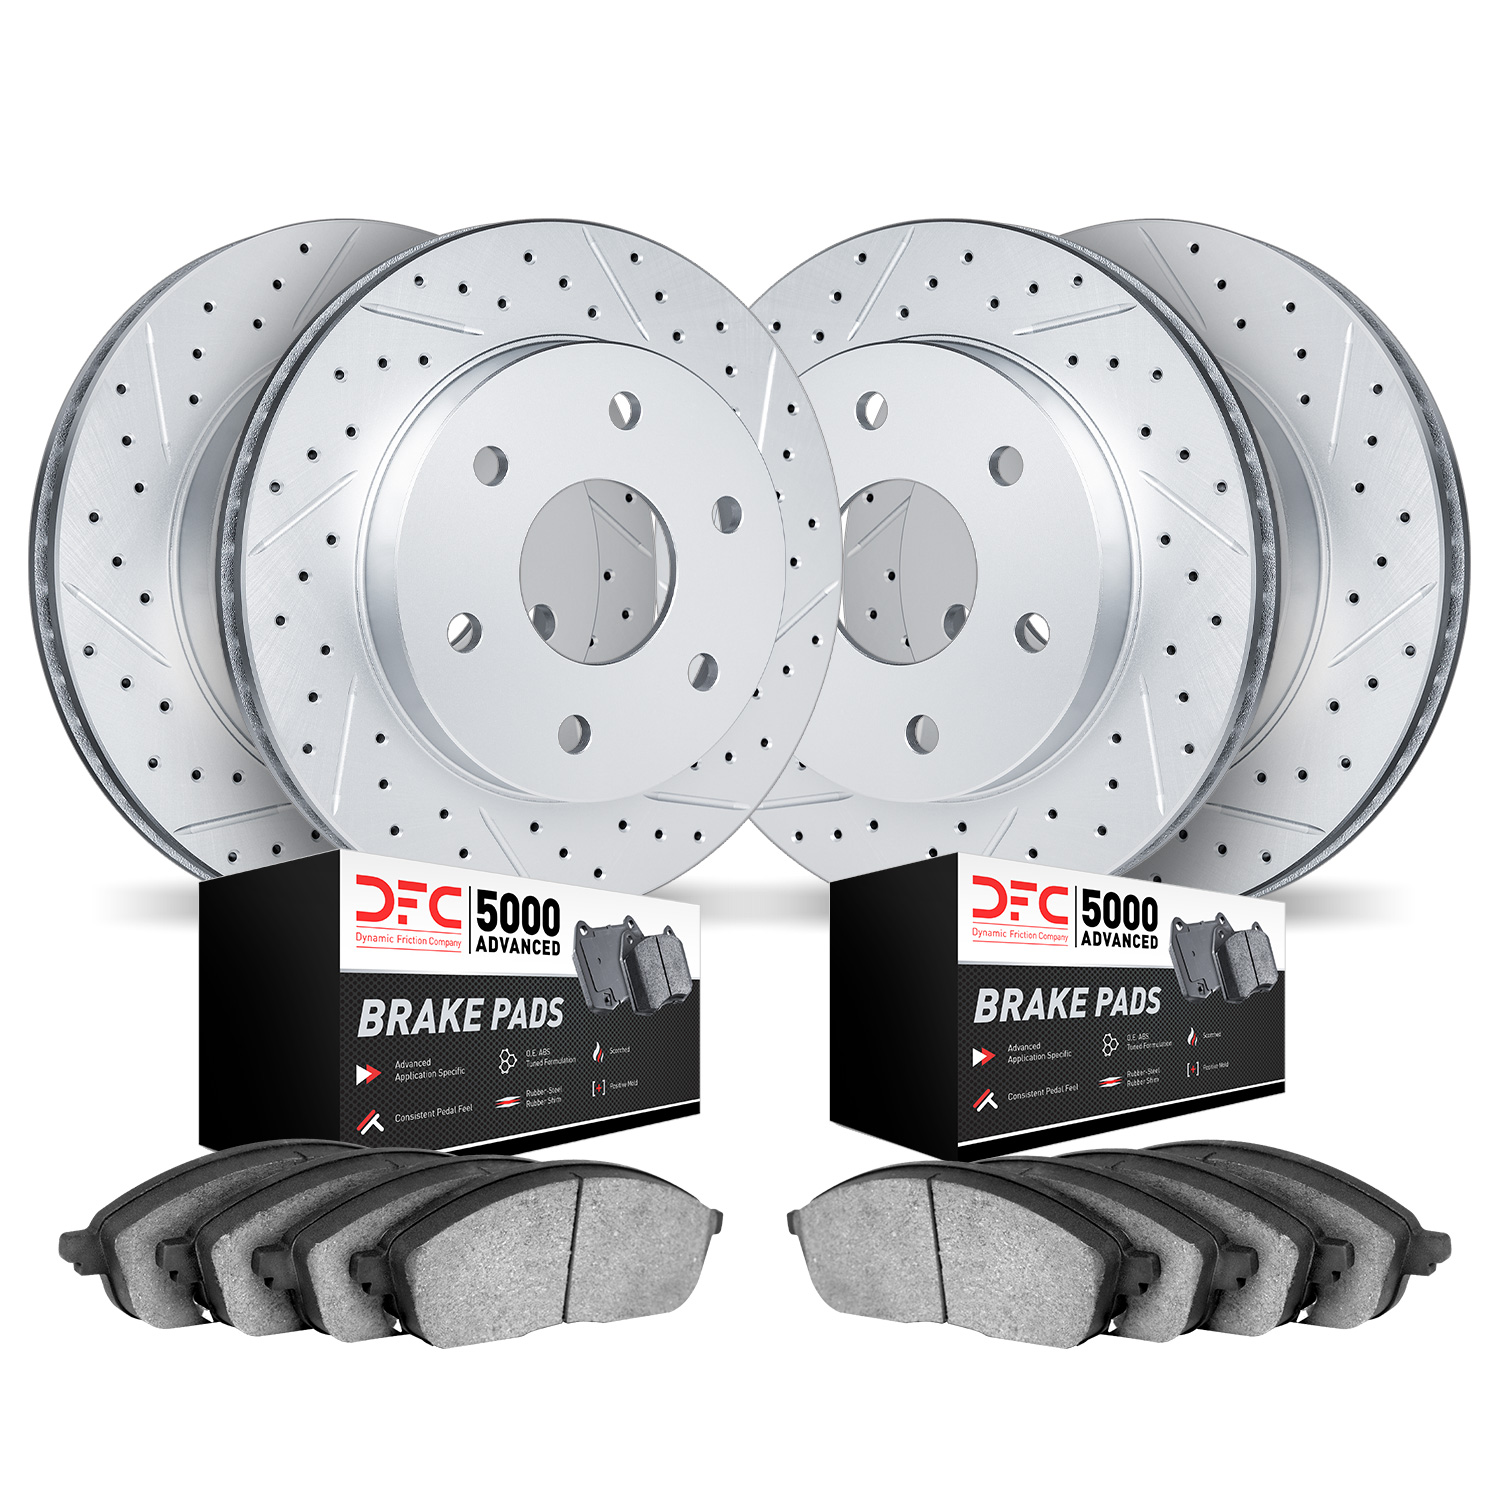 2504-67073 Geoperformance Drilled/Slotted Rotors w/5000 Advanced Brake Pads Kit, 2008-2011 Infiniti/Nissan, Position: Front and